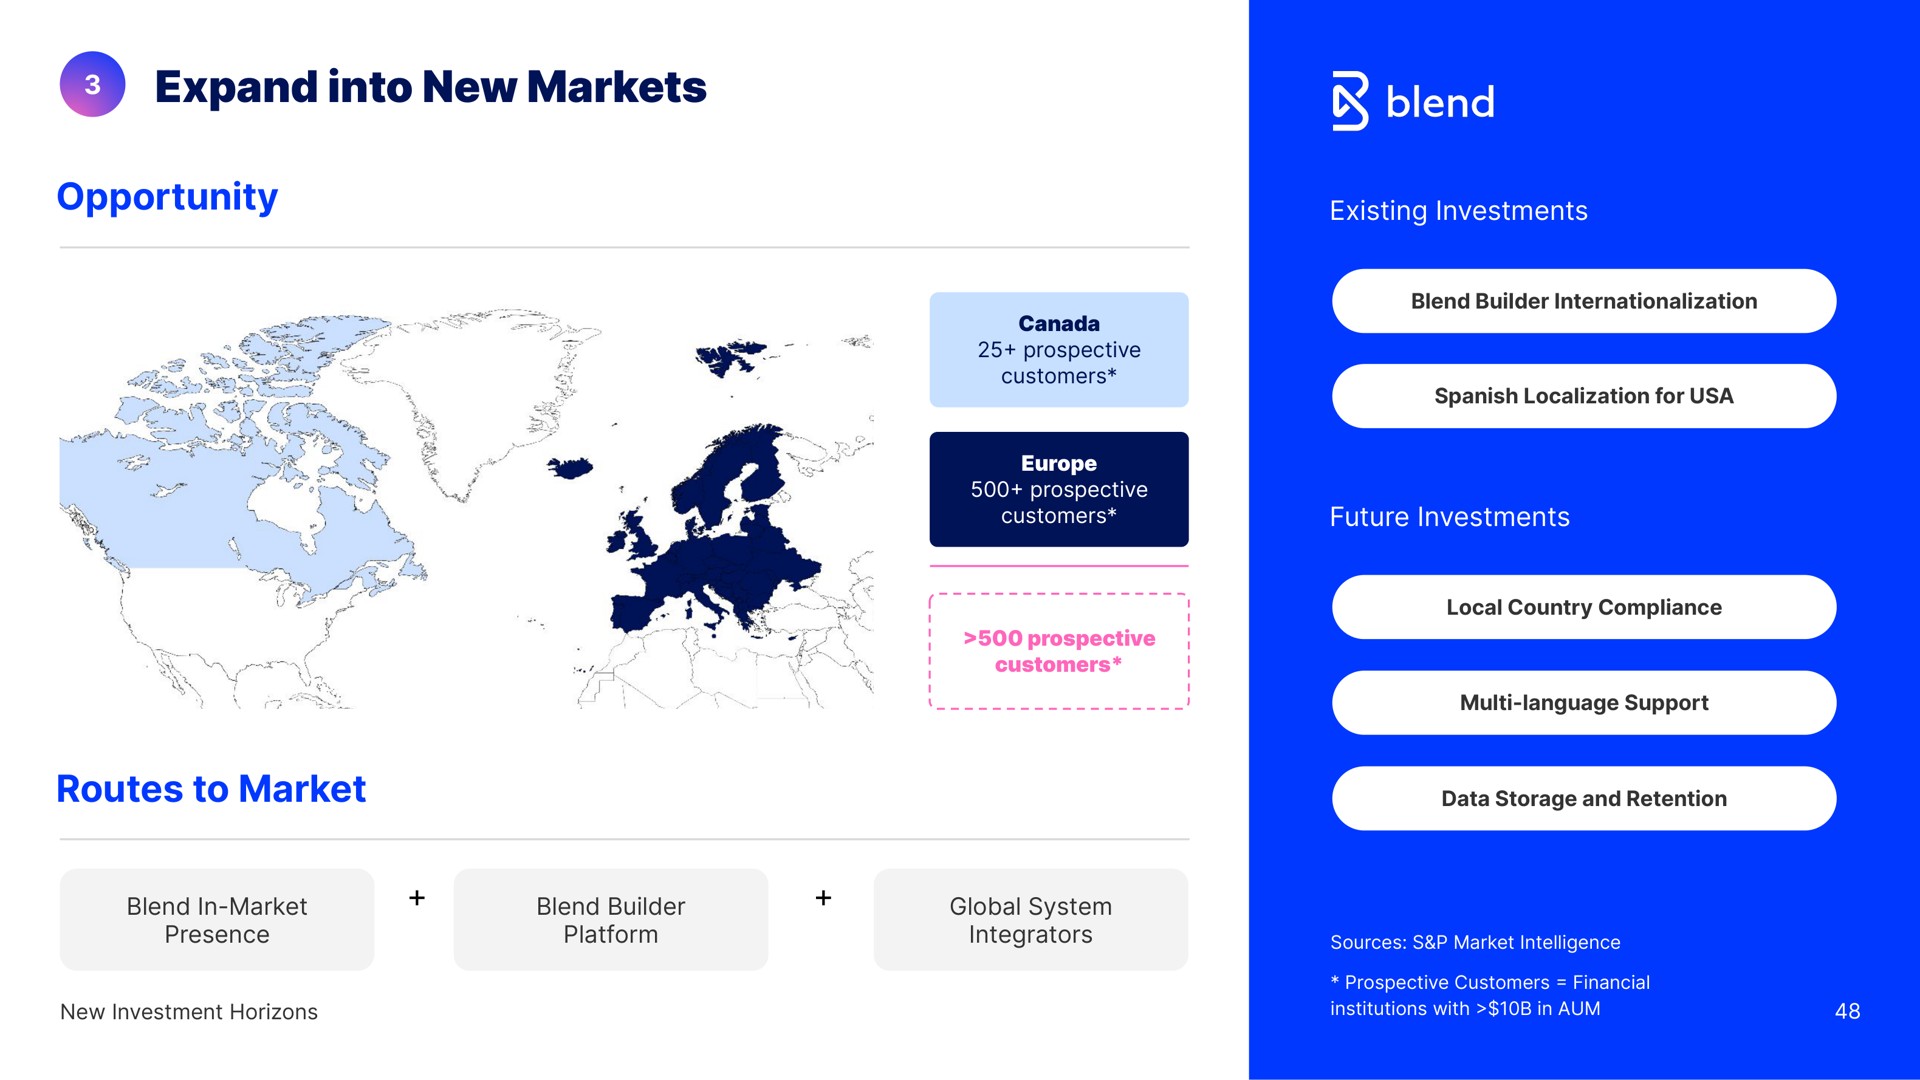 expand into new markets opportunity routes to market | Blend